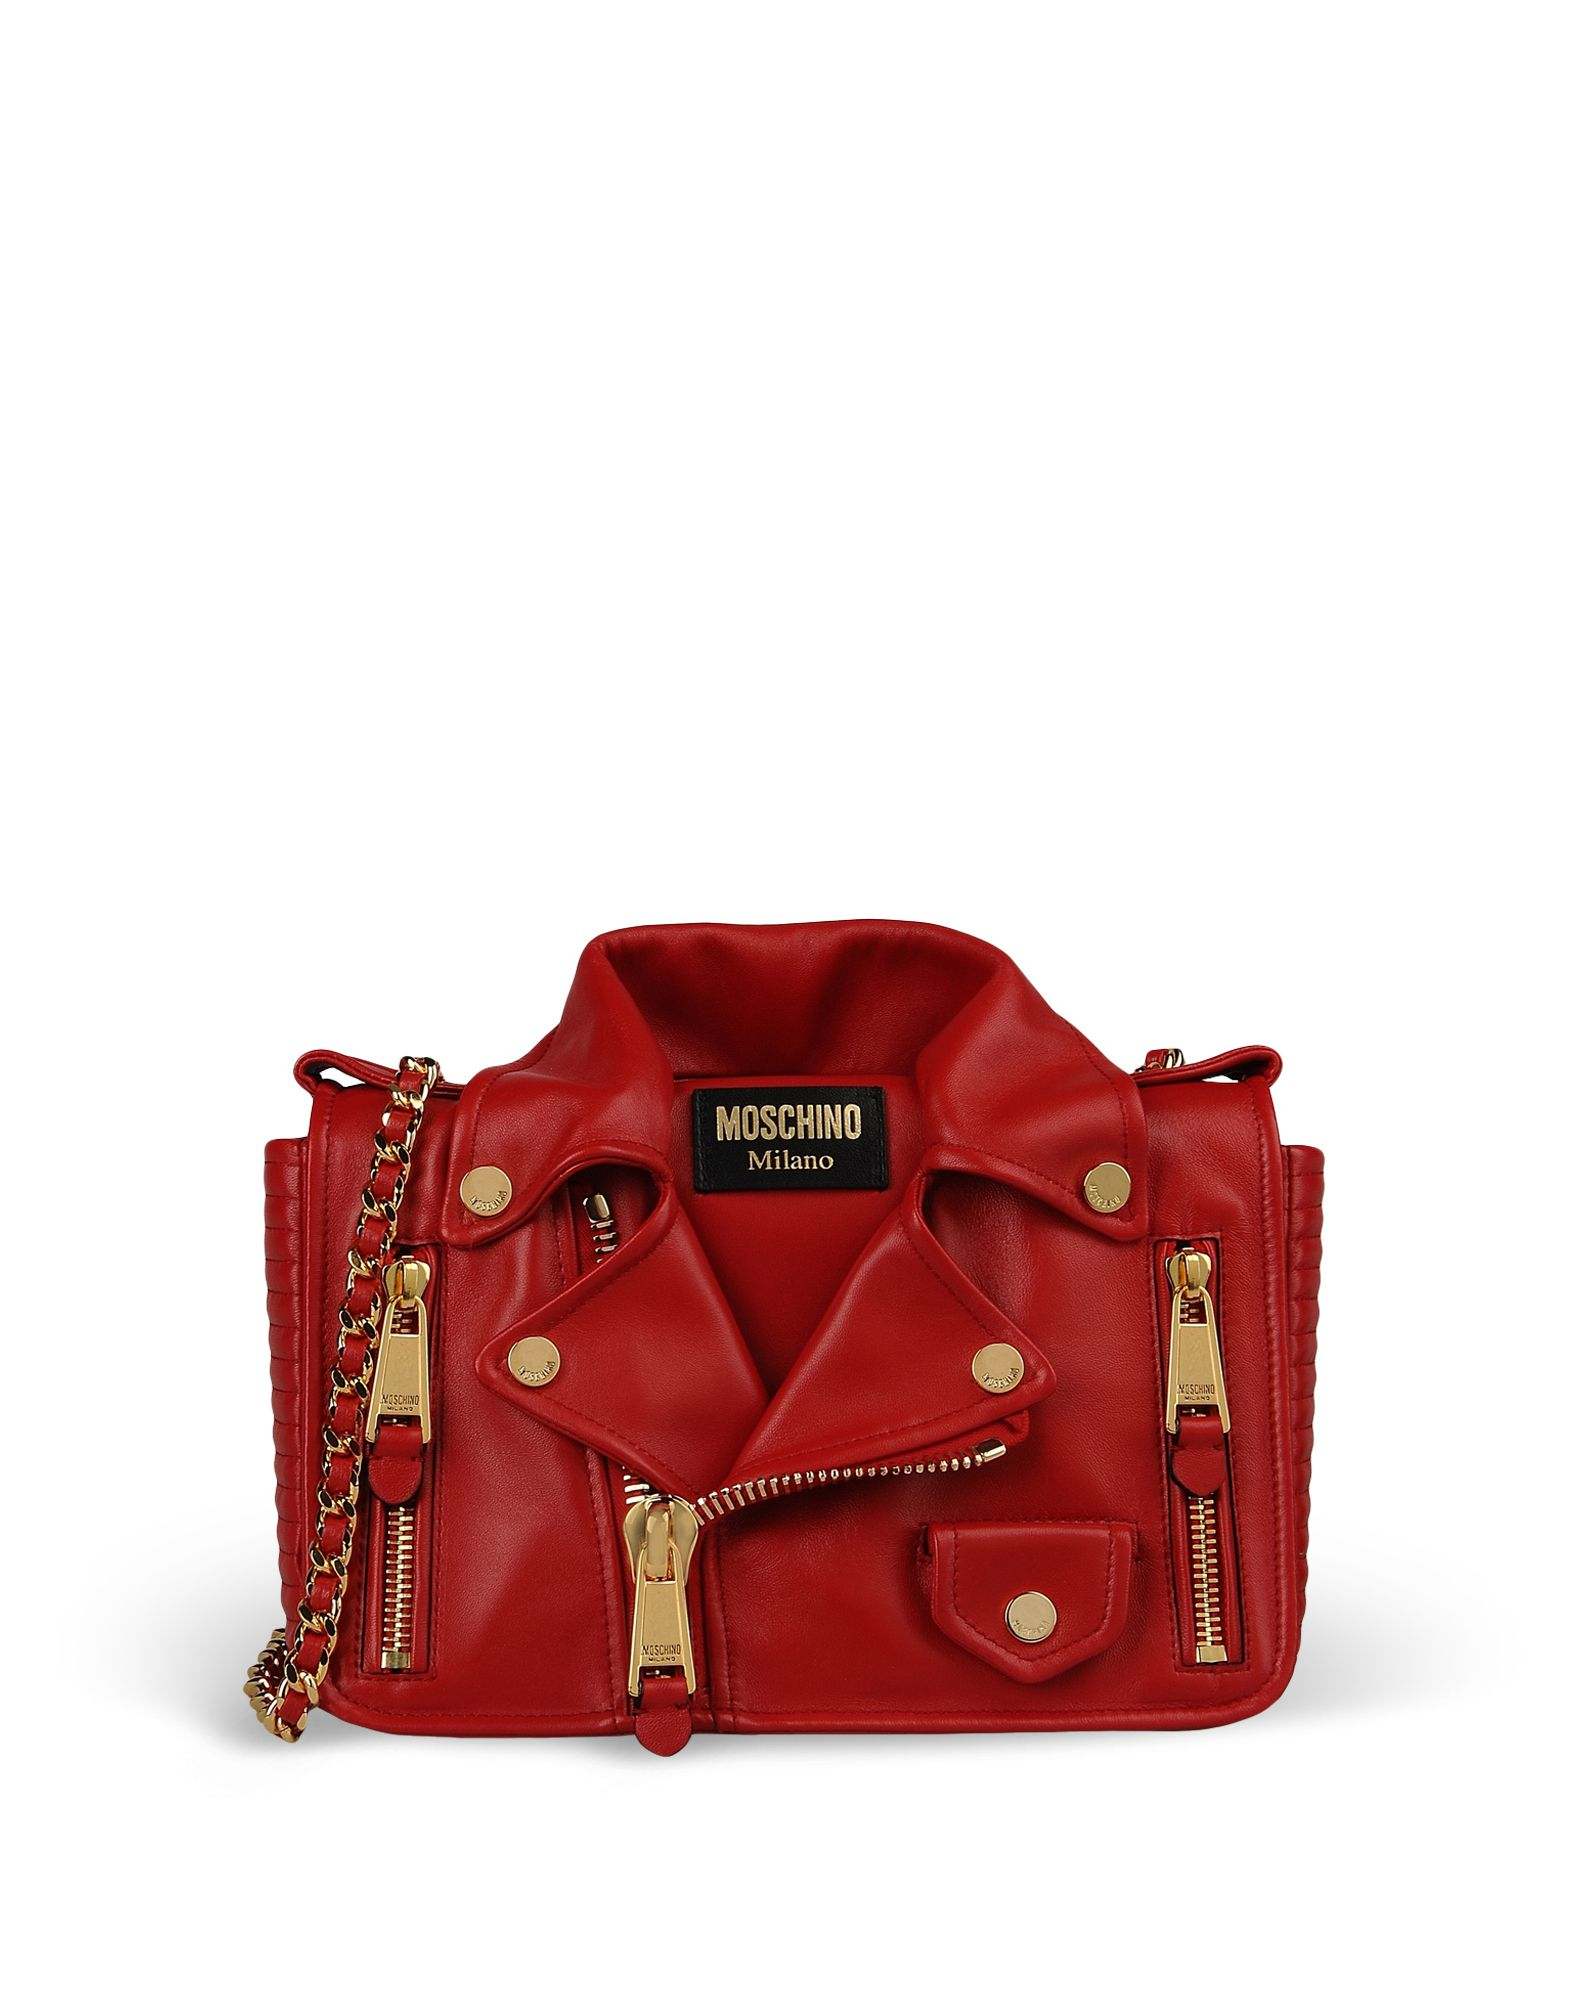 Lyst - Moschino Small Leather Bag in Red